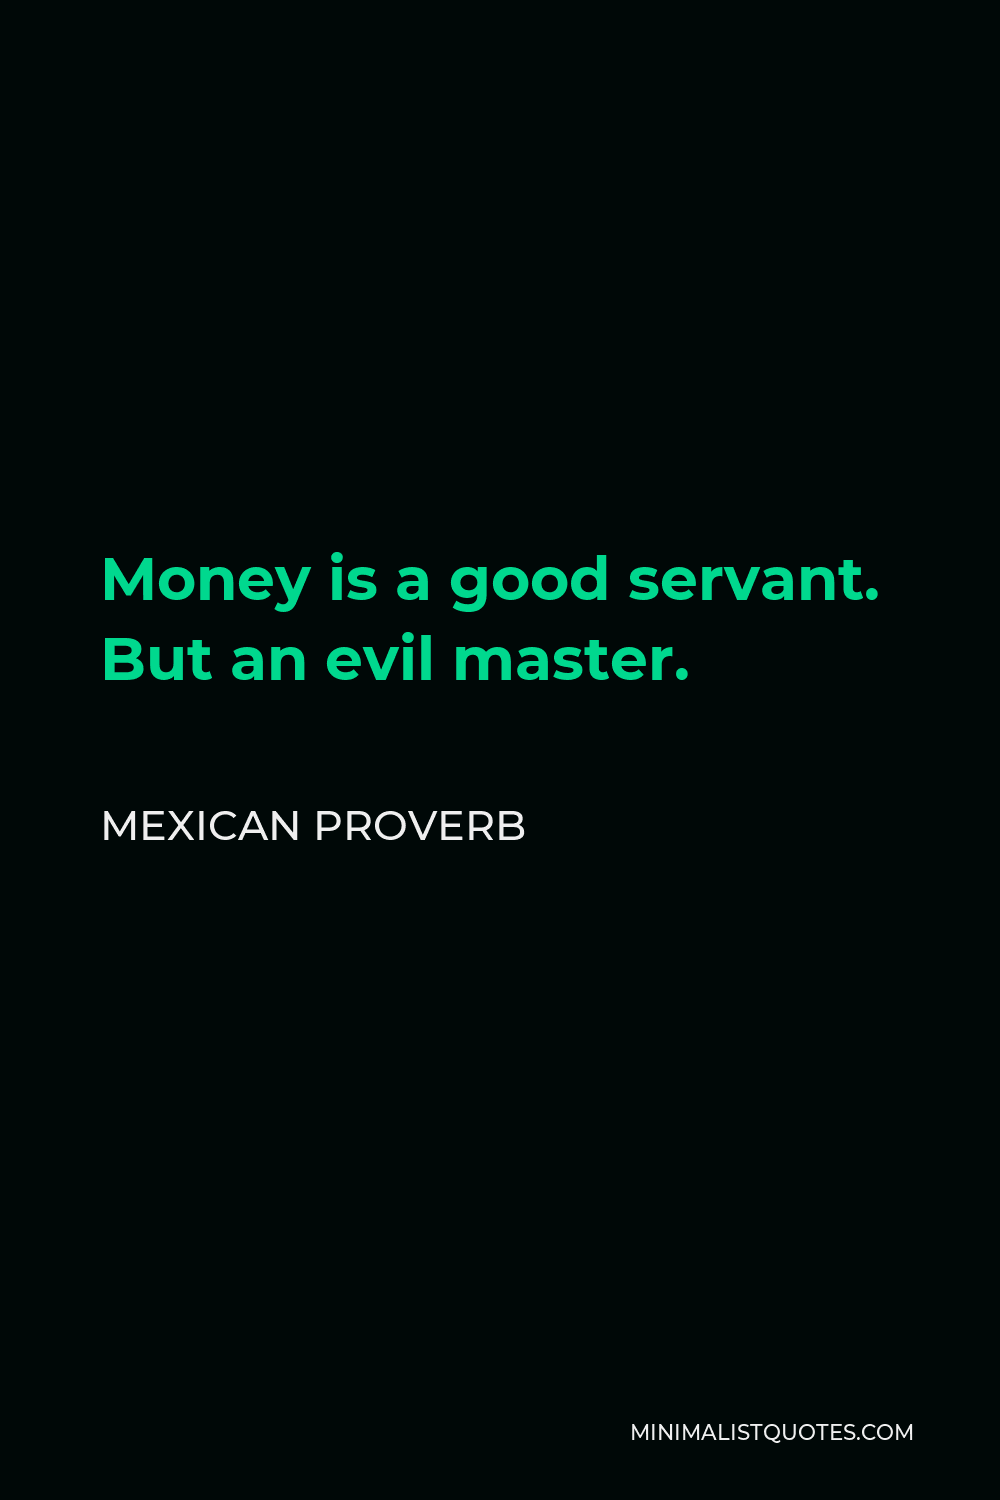 Mexican Proverb Quote - Money is a good servant. But an evil master.